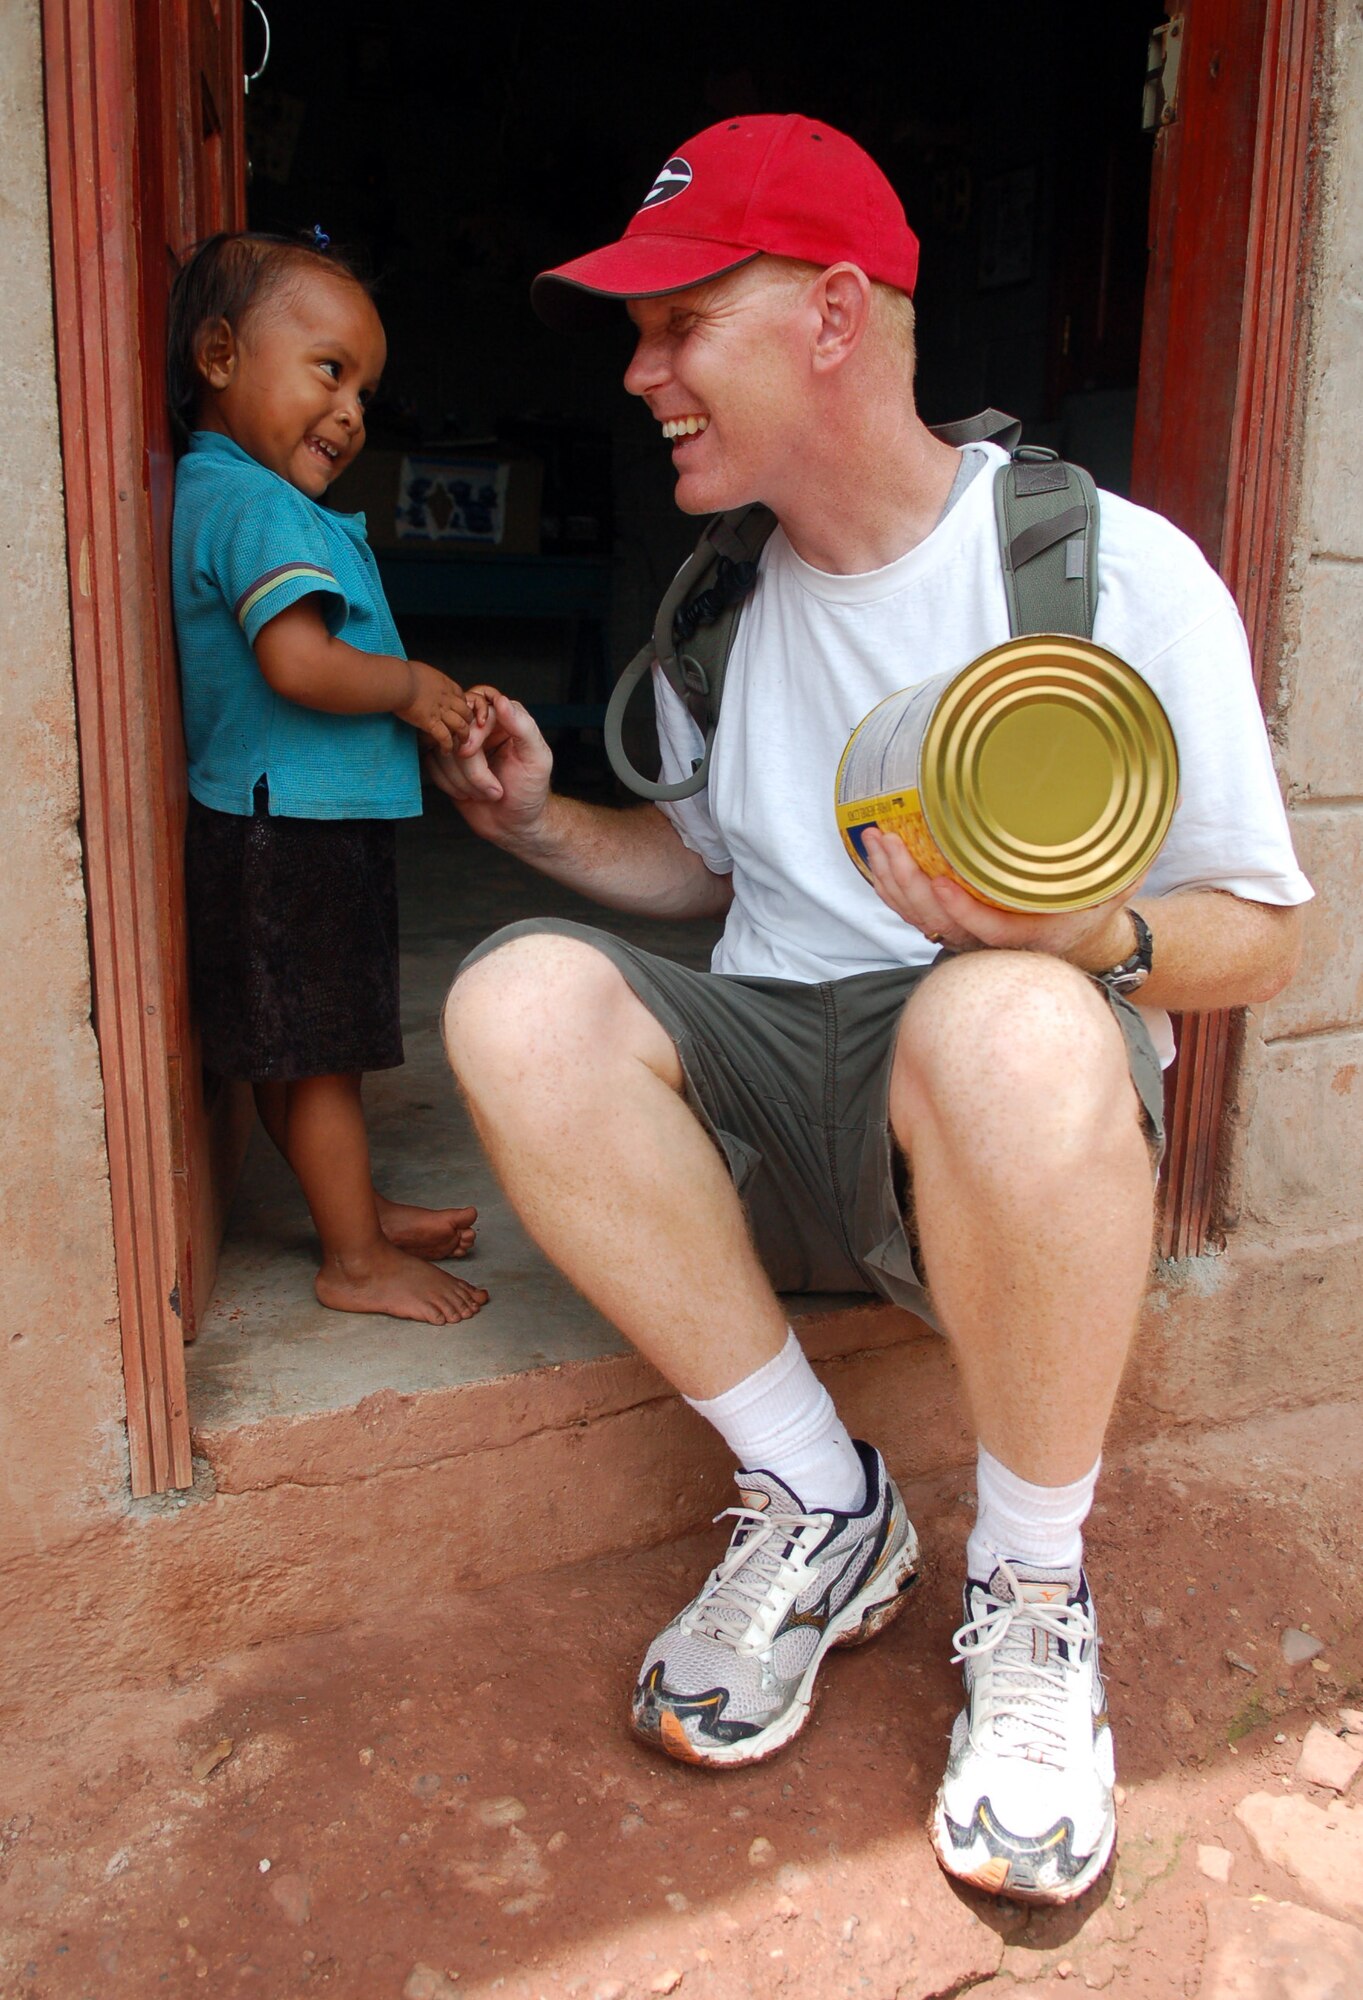 MATA DE PLATANO, Honduras -- Air Force Chaplain (Capt.) Chad Bellamy, Joint Task Force-Bravo chaplain, plays with a young Honduran girl during a break on a nearly five-mile hike to deliver the supplies to families living in the mountains.     (U.S. Air Force photo by Staff Sgt. Austin M. May)